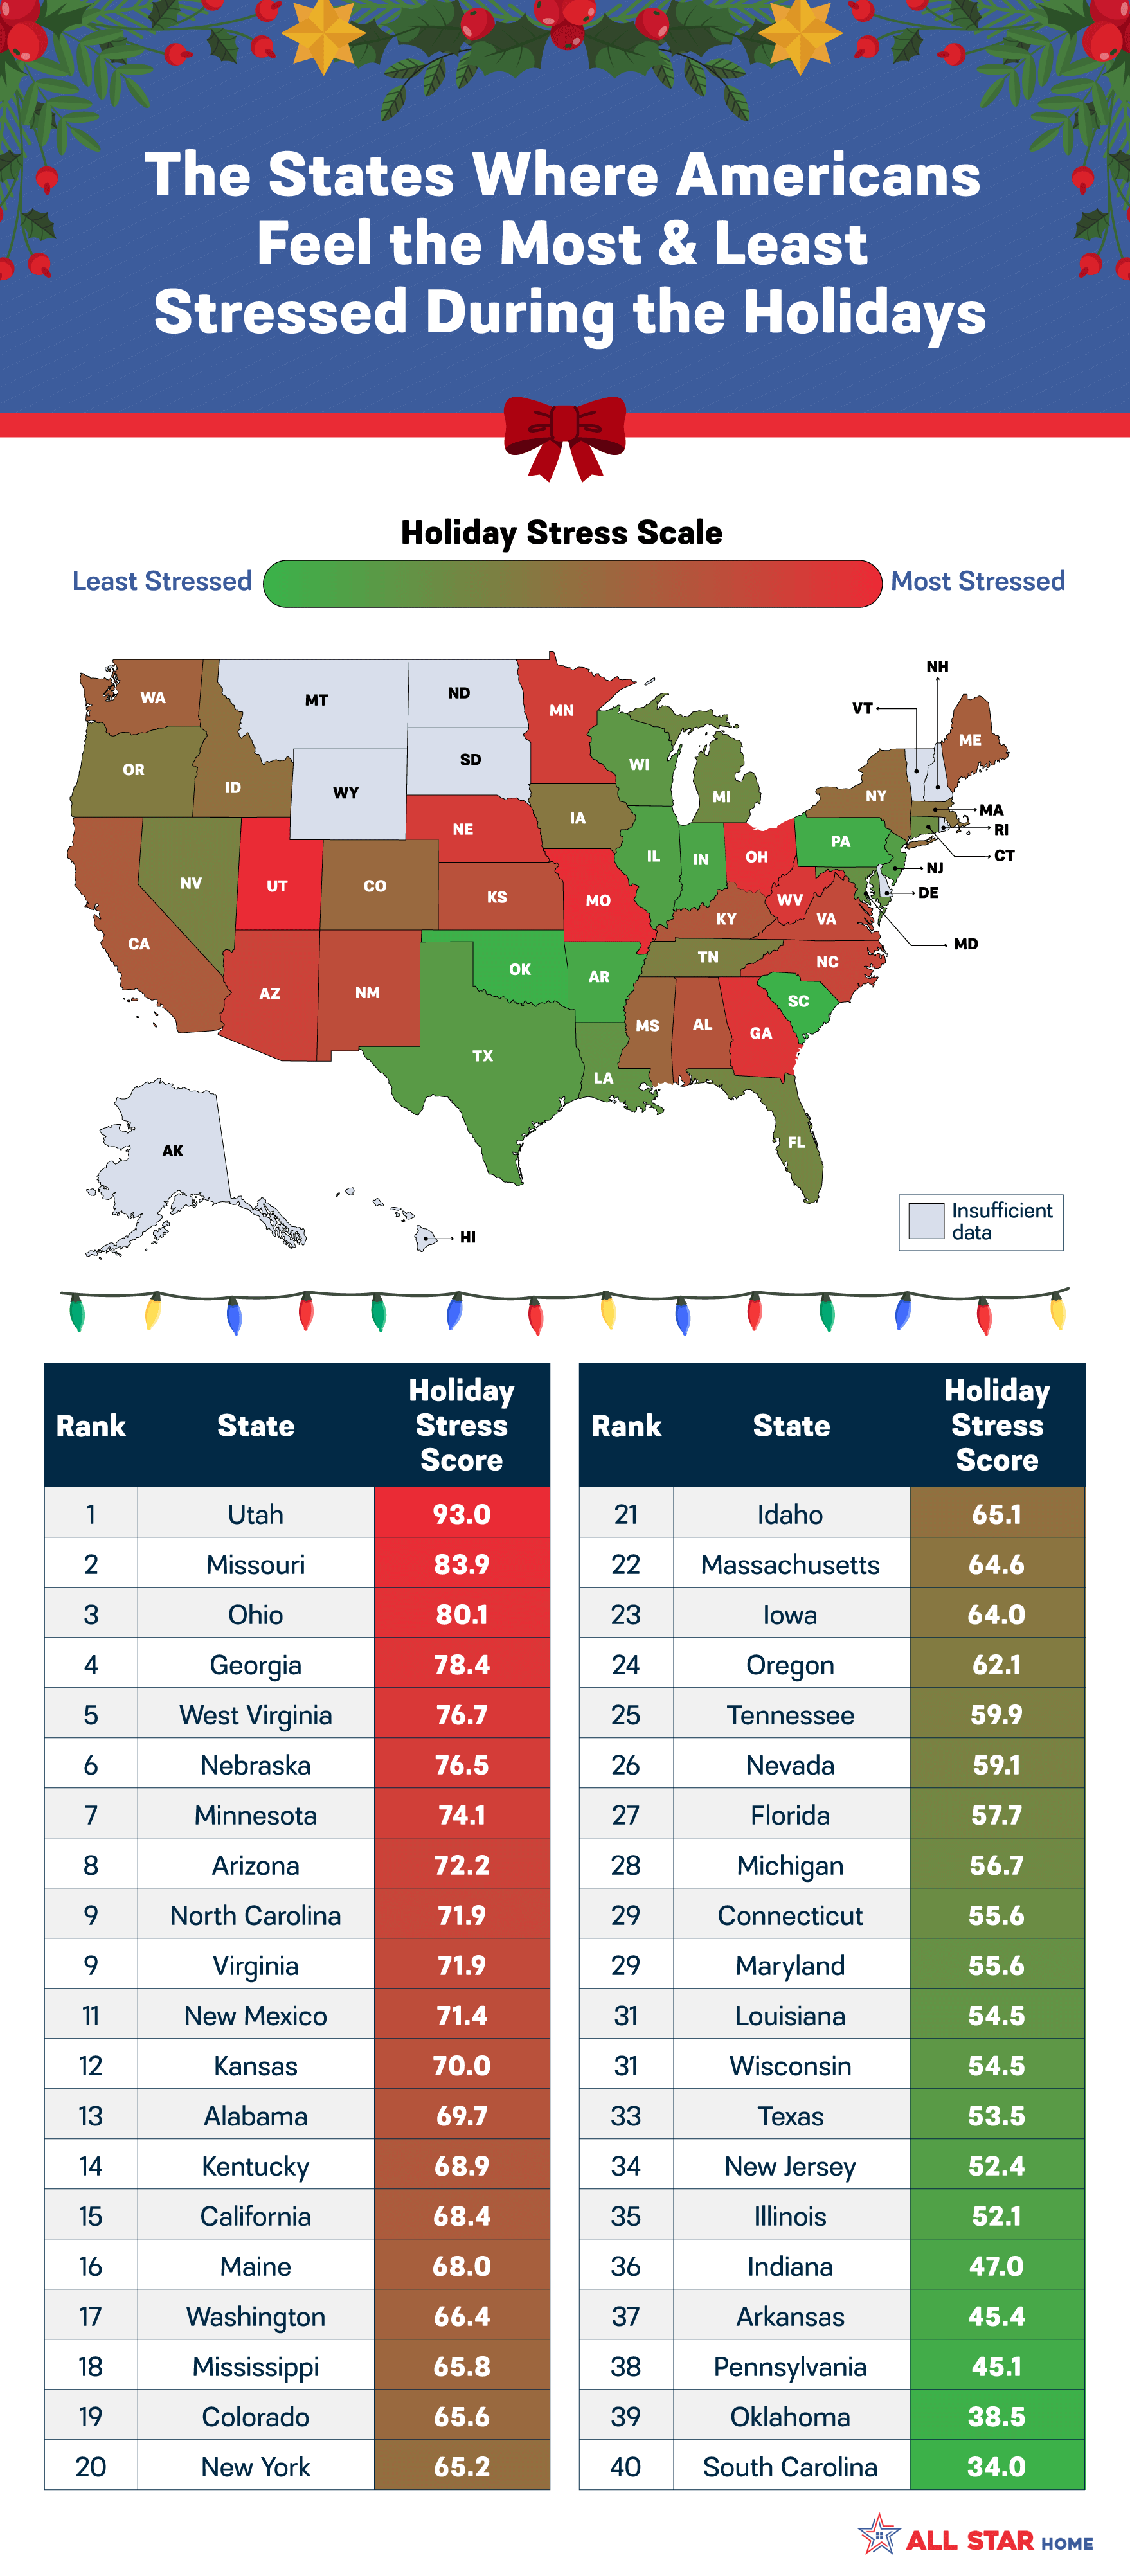 A U.S. heatmap showing where Americans are most and least likely to experience more stress during the holiday season